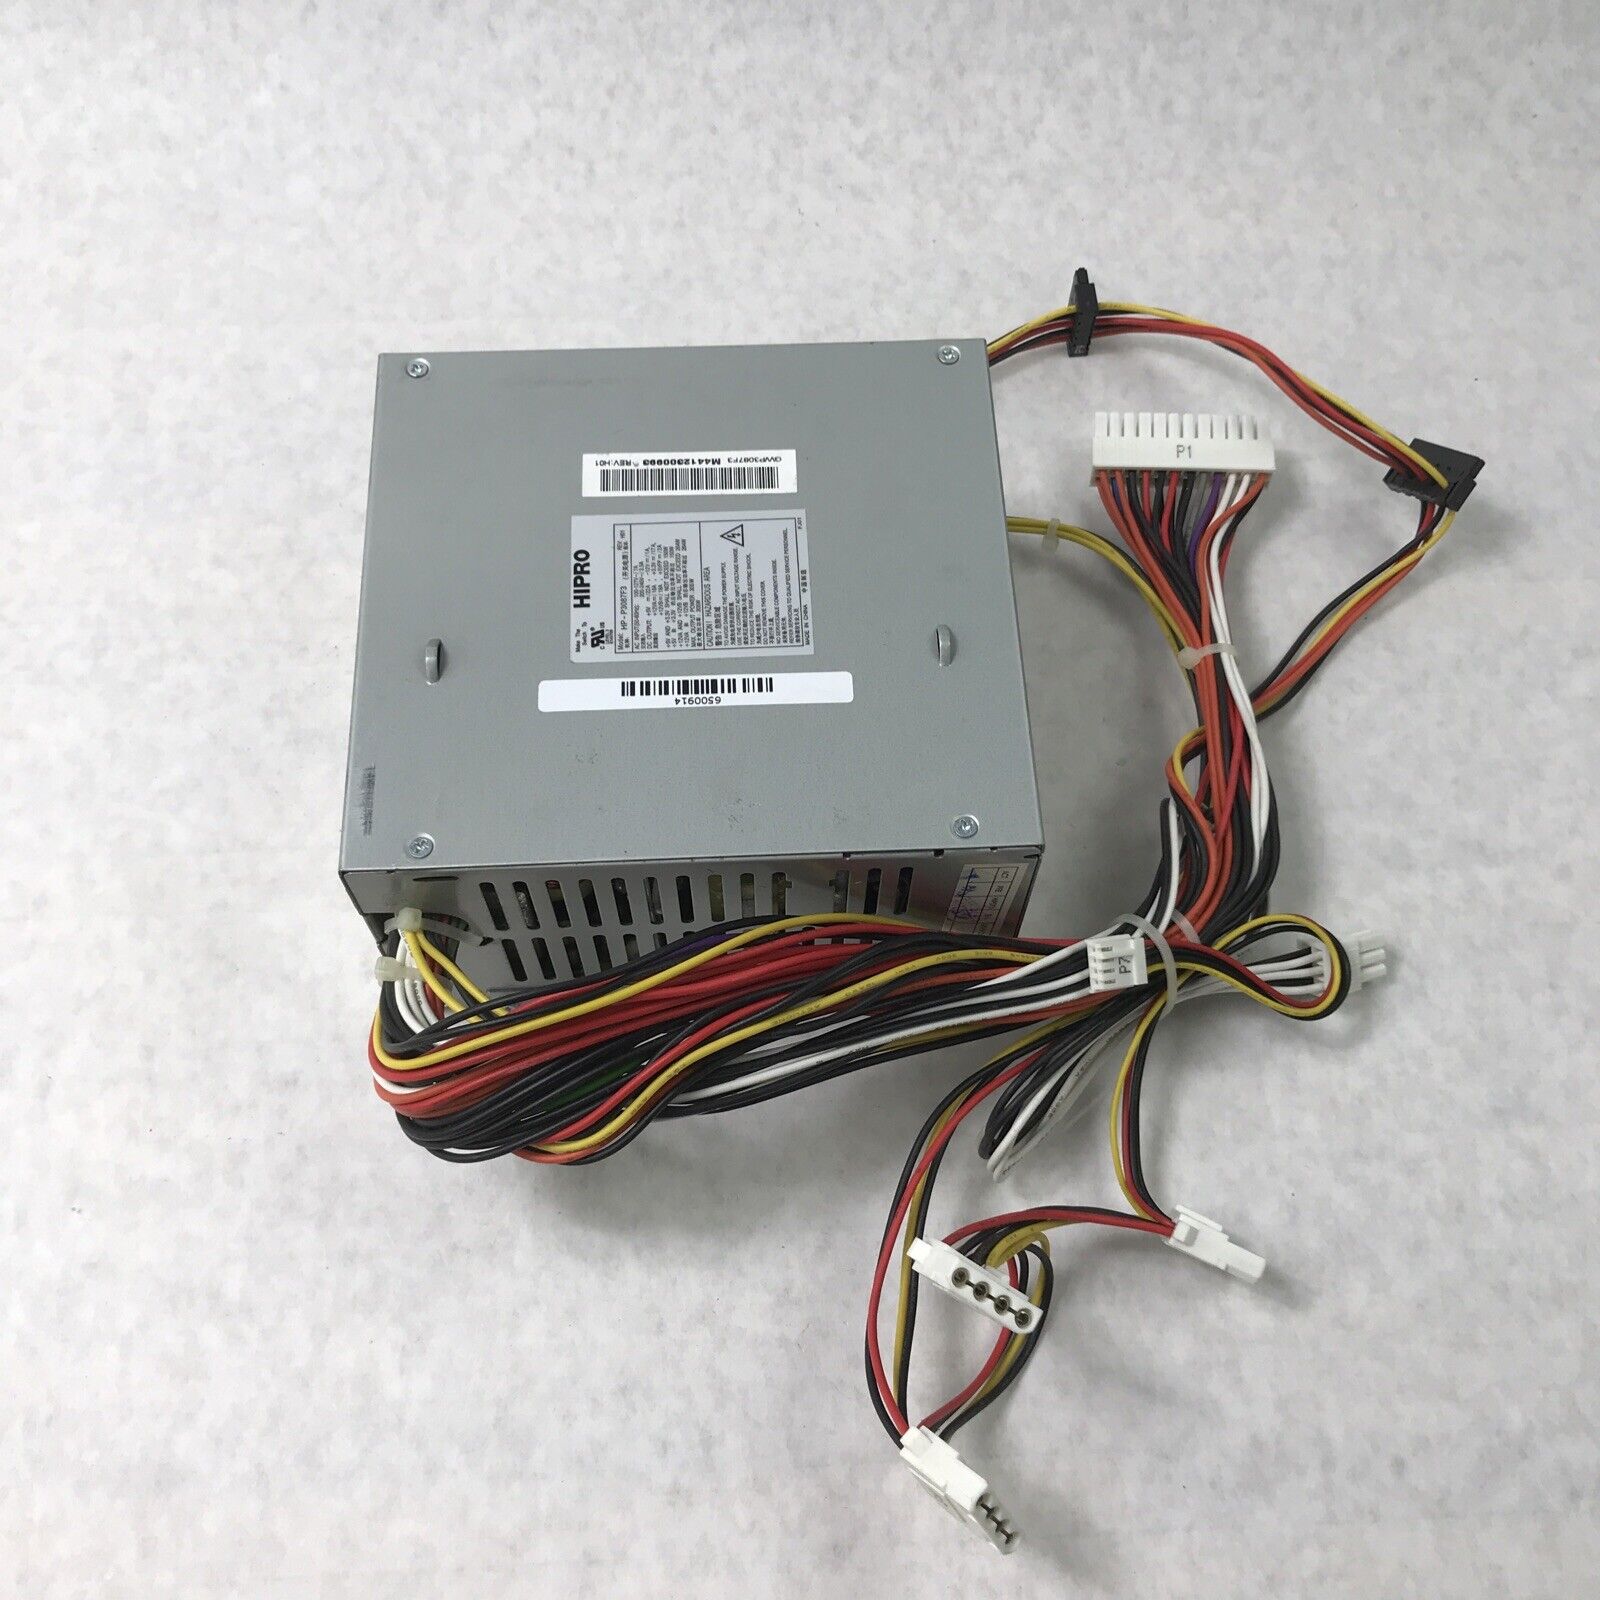 Hipro HP-P3087F3 240V 264W 18A Power Supply M4412300993 (Tested and Working)